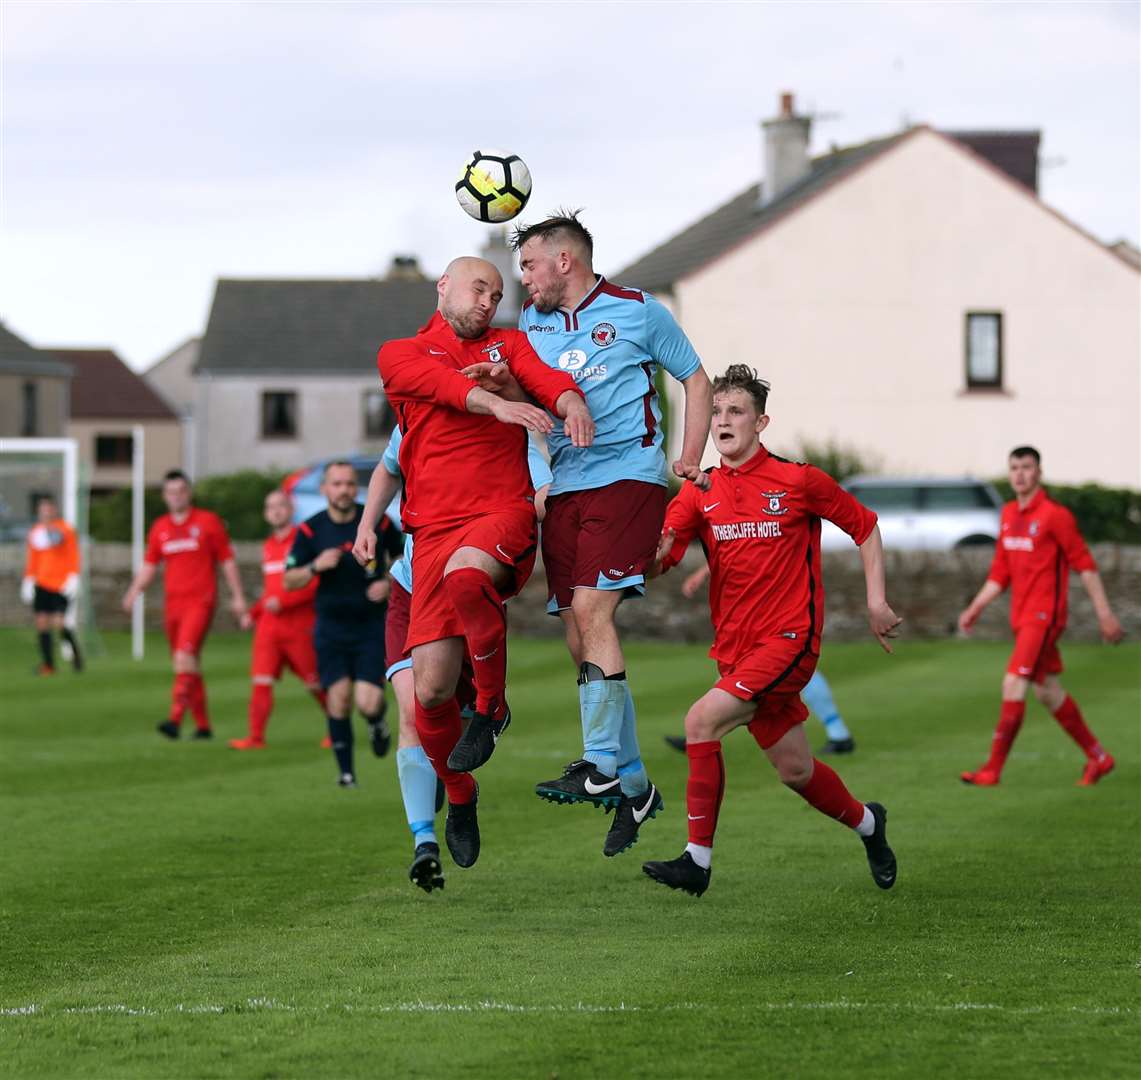 Pentland United's Luke Manson (right) wins this aerial duel with Sandy Sutherland. However, the Wick Groats man would be smiling at the end as his side defeated Pentland 5-2 to win the Colin Macleod Memorial Cup. Picture: James Gunn